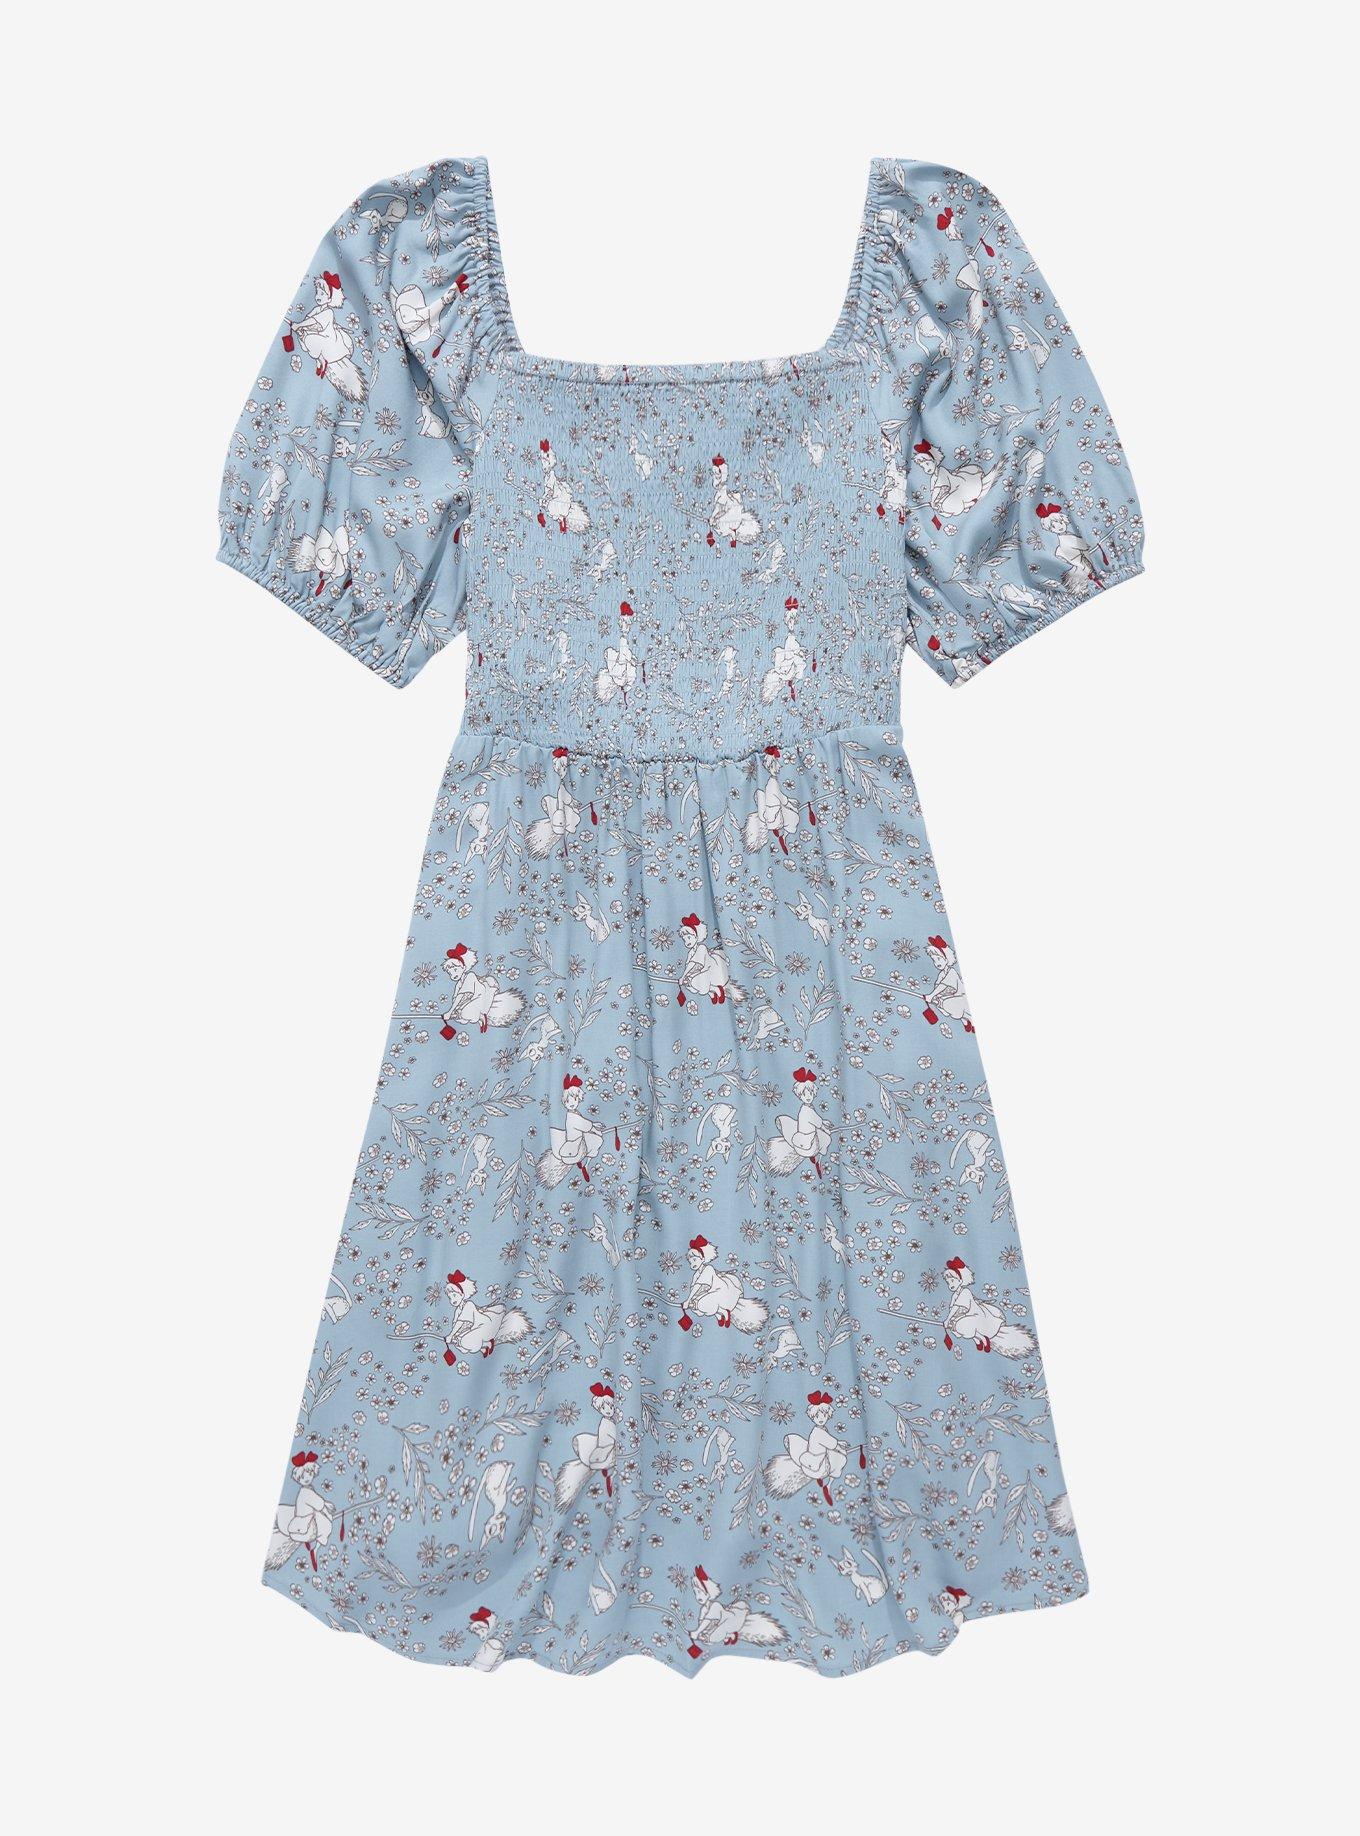 Studio Ghibli Kiki's Delivery Service Floral Smock Dress - BoxLunch  Exclusive | BoxLunch